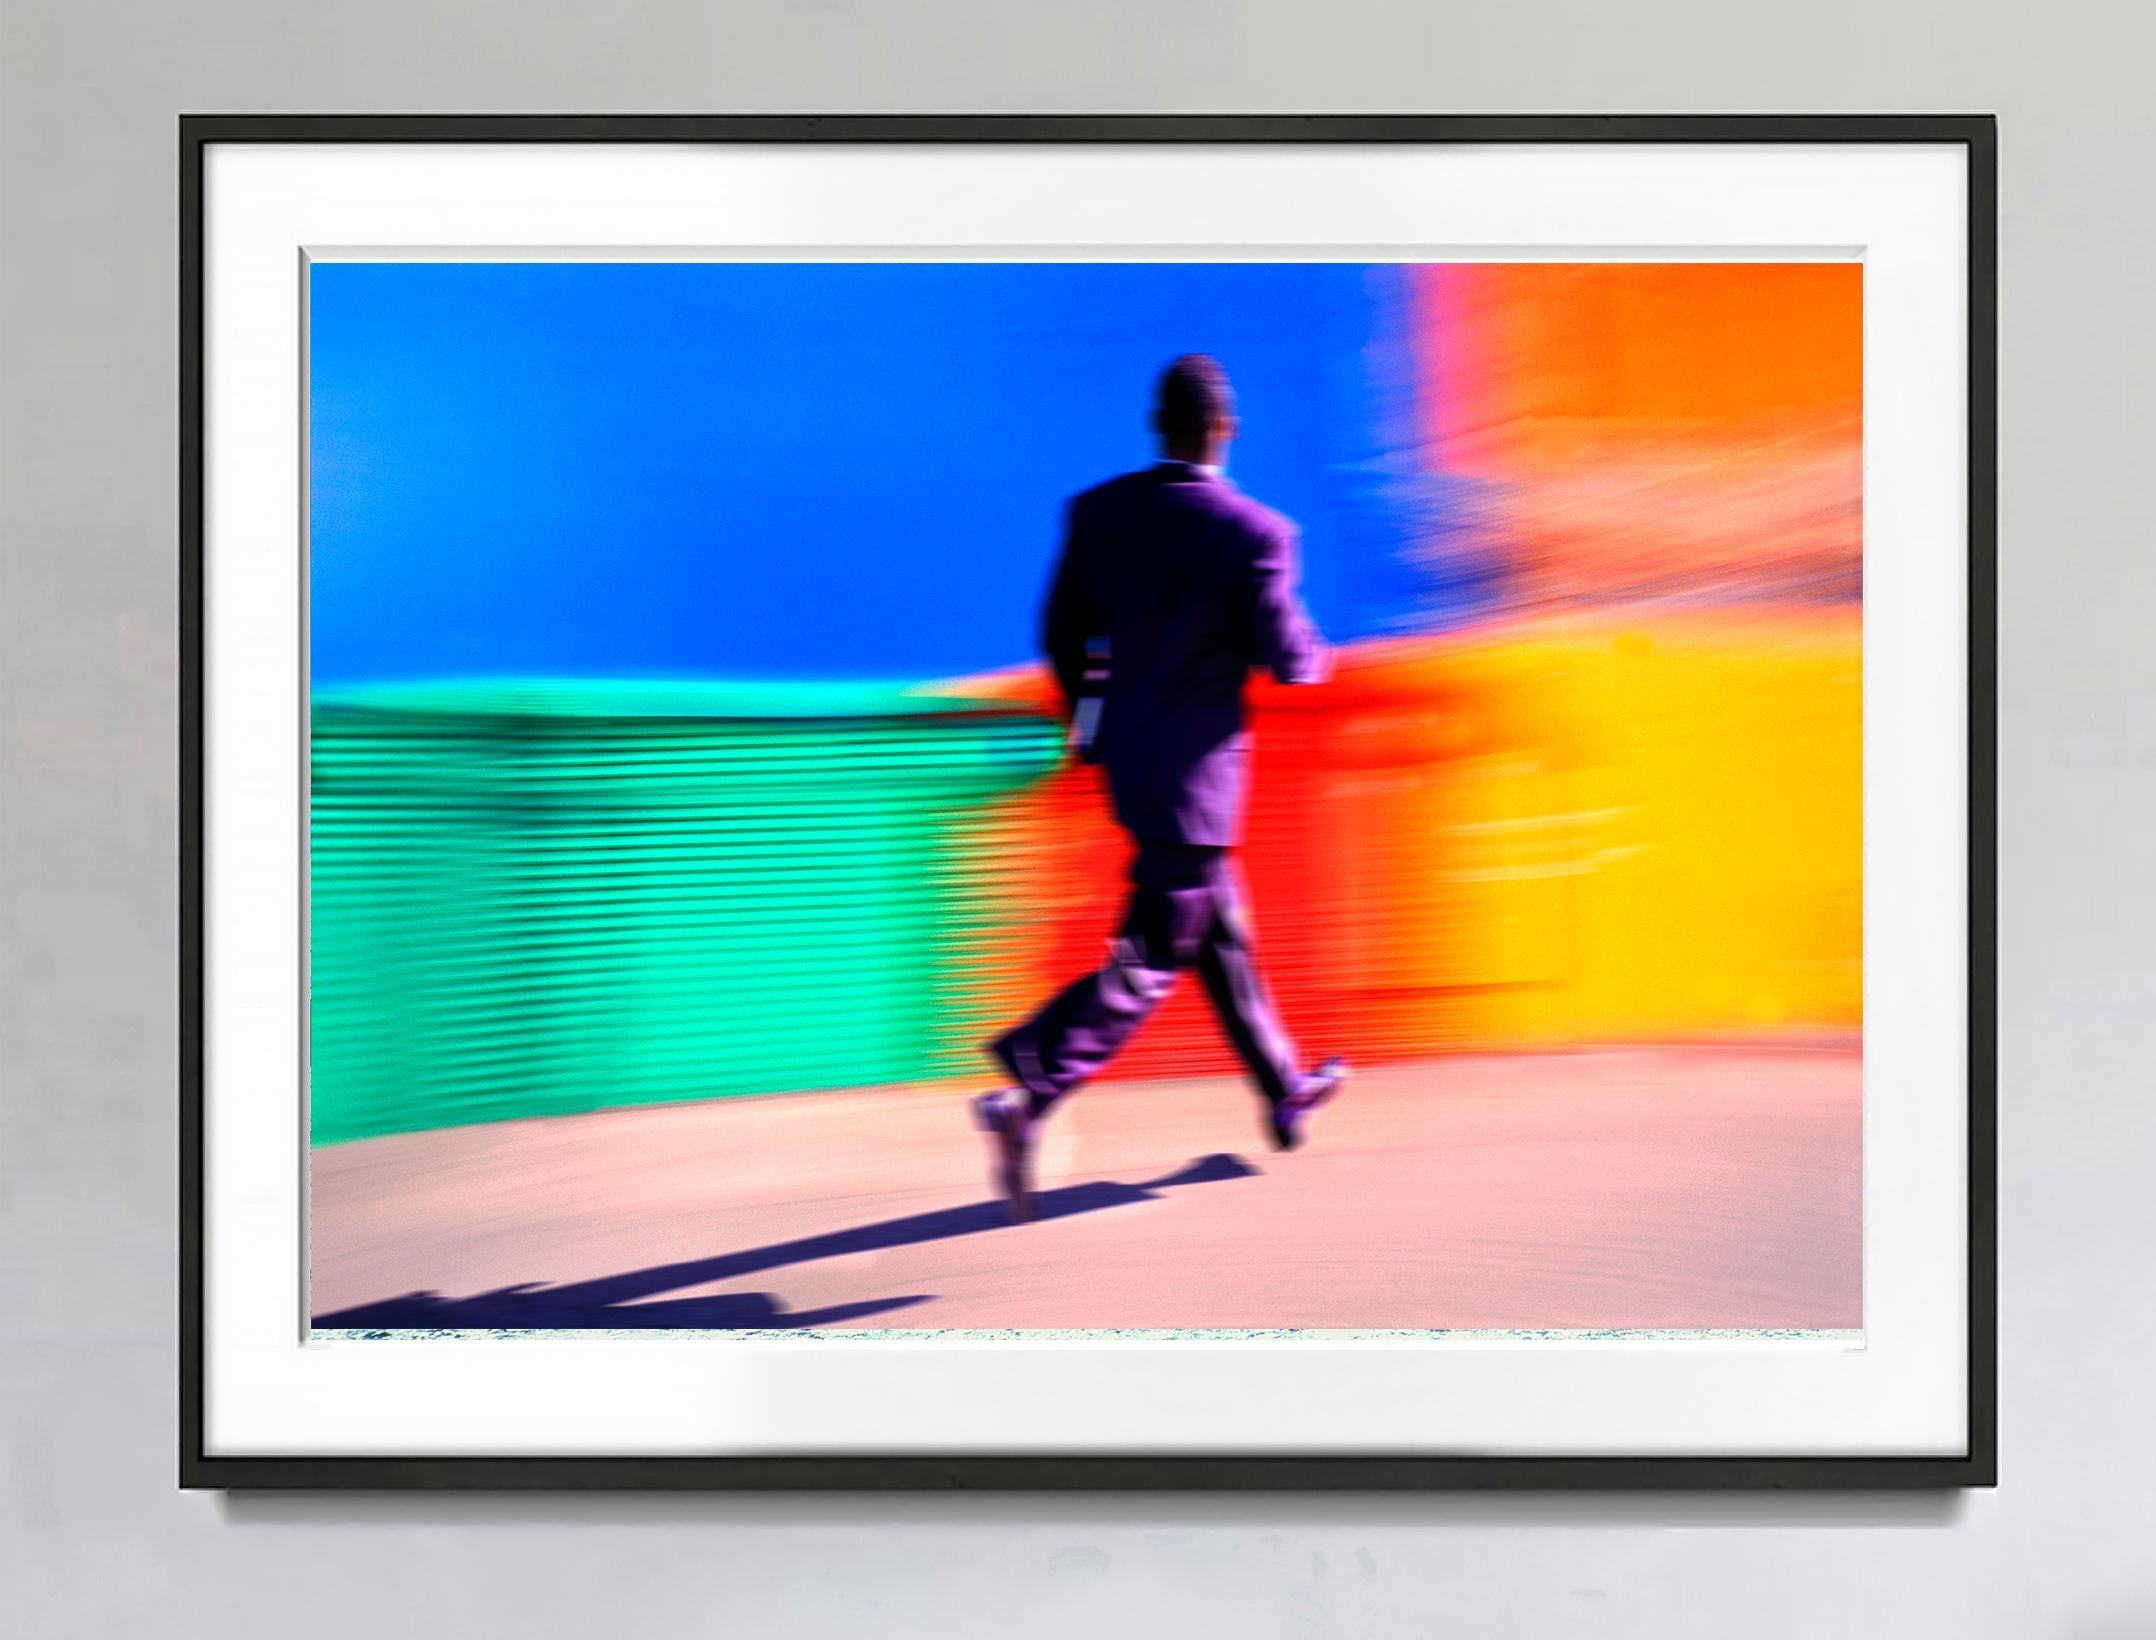 Black Businessman Running Against a Colorful Background - Photograph by Mitchell Funk